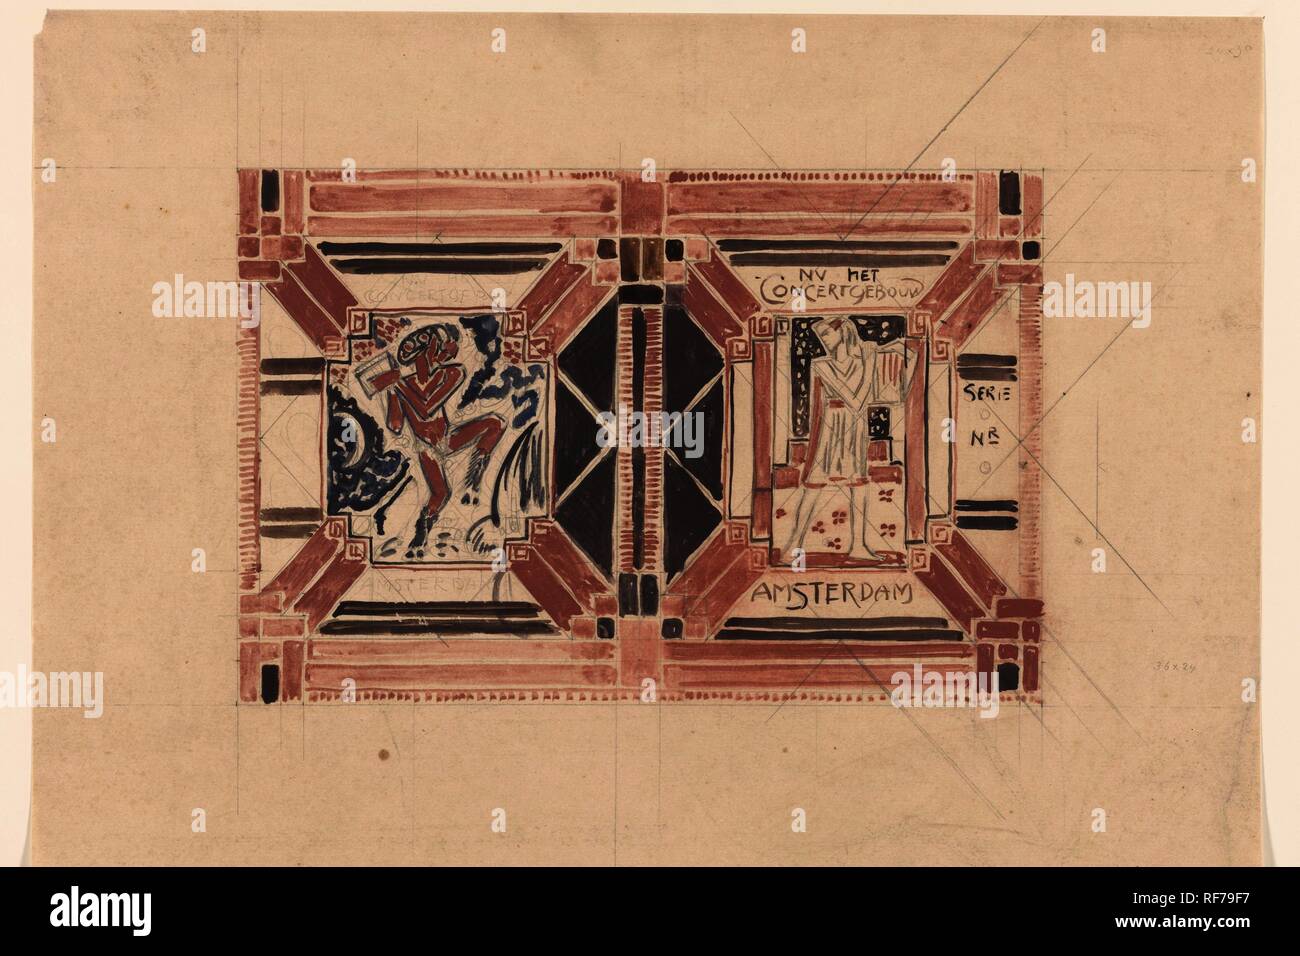 Design for the cover of a Concertgebouw program. Draughtsman: Richard Roland Holst. Dating: 1878 - 1938. Measurements: h 385 mm × w 544 mm. Museum: Rijksmuseum, Amsterdam. Stock Photo